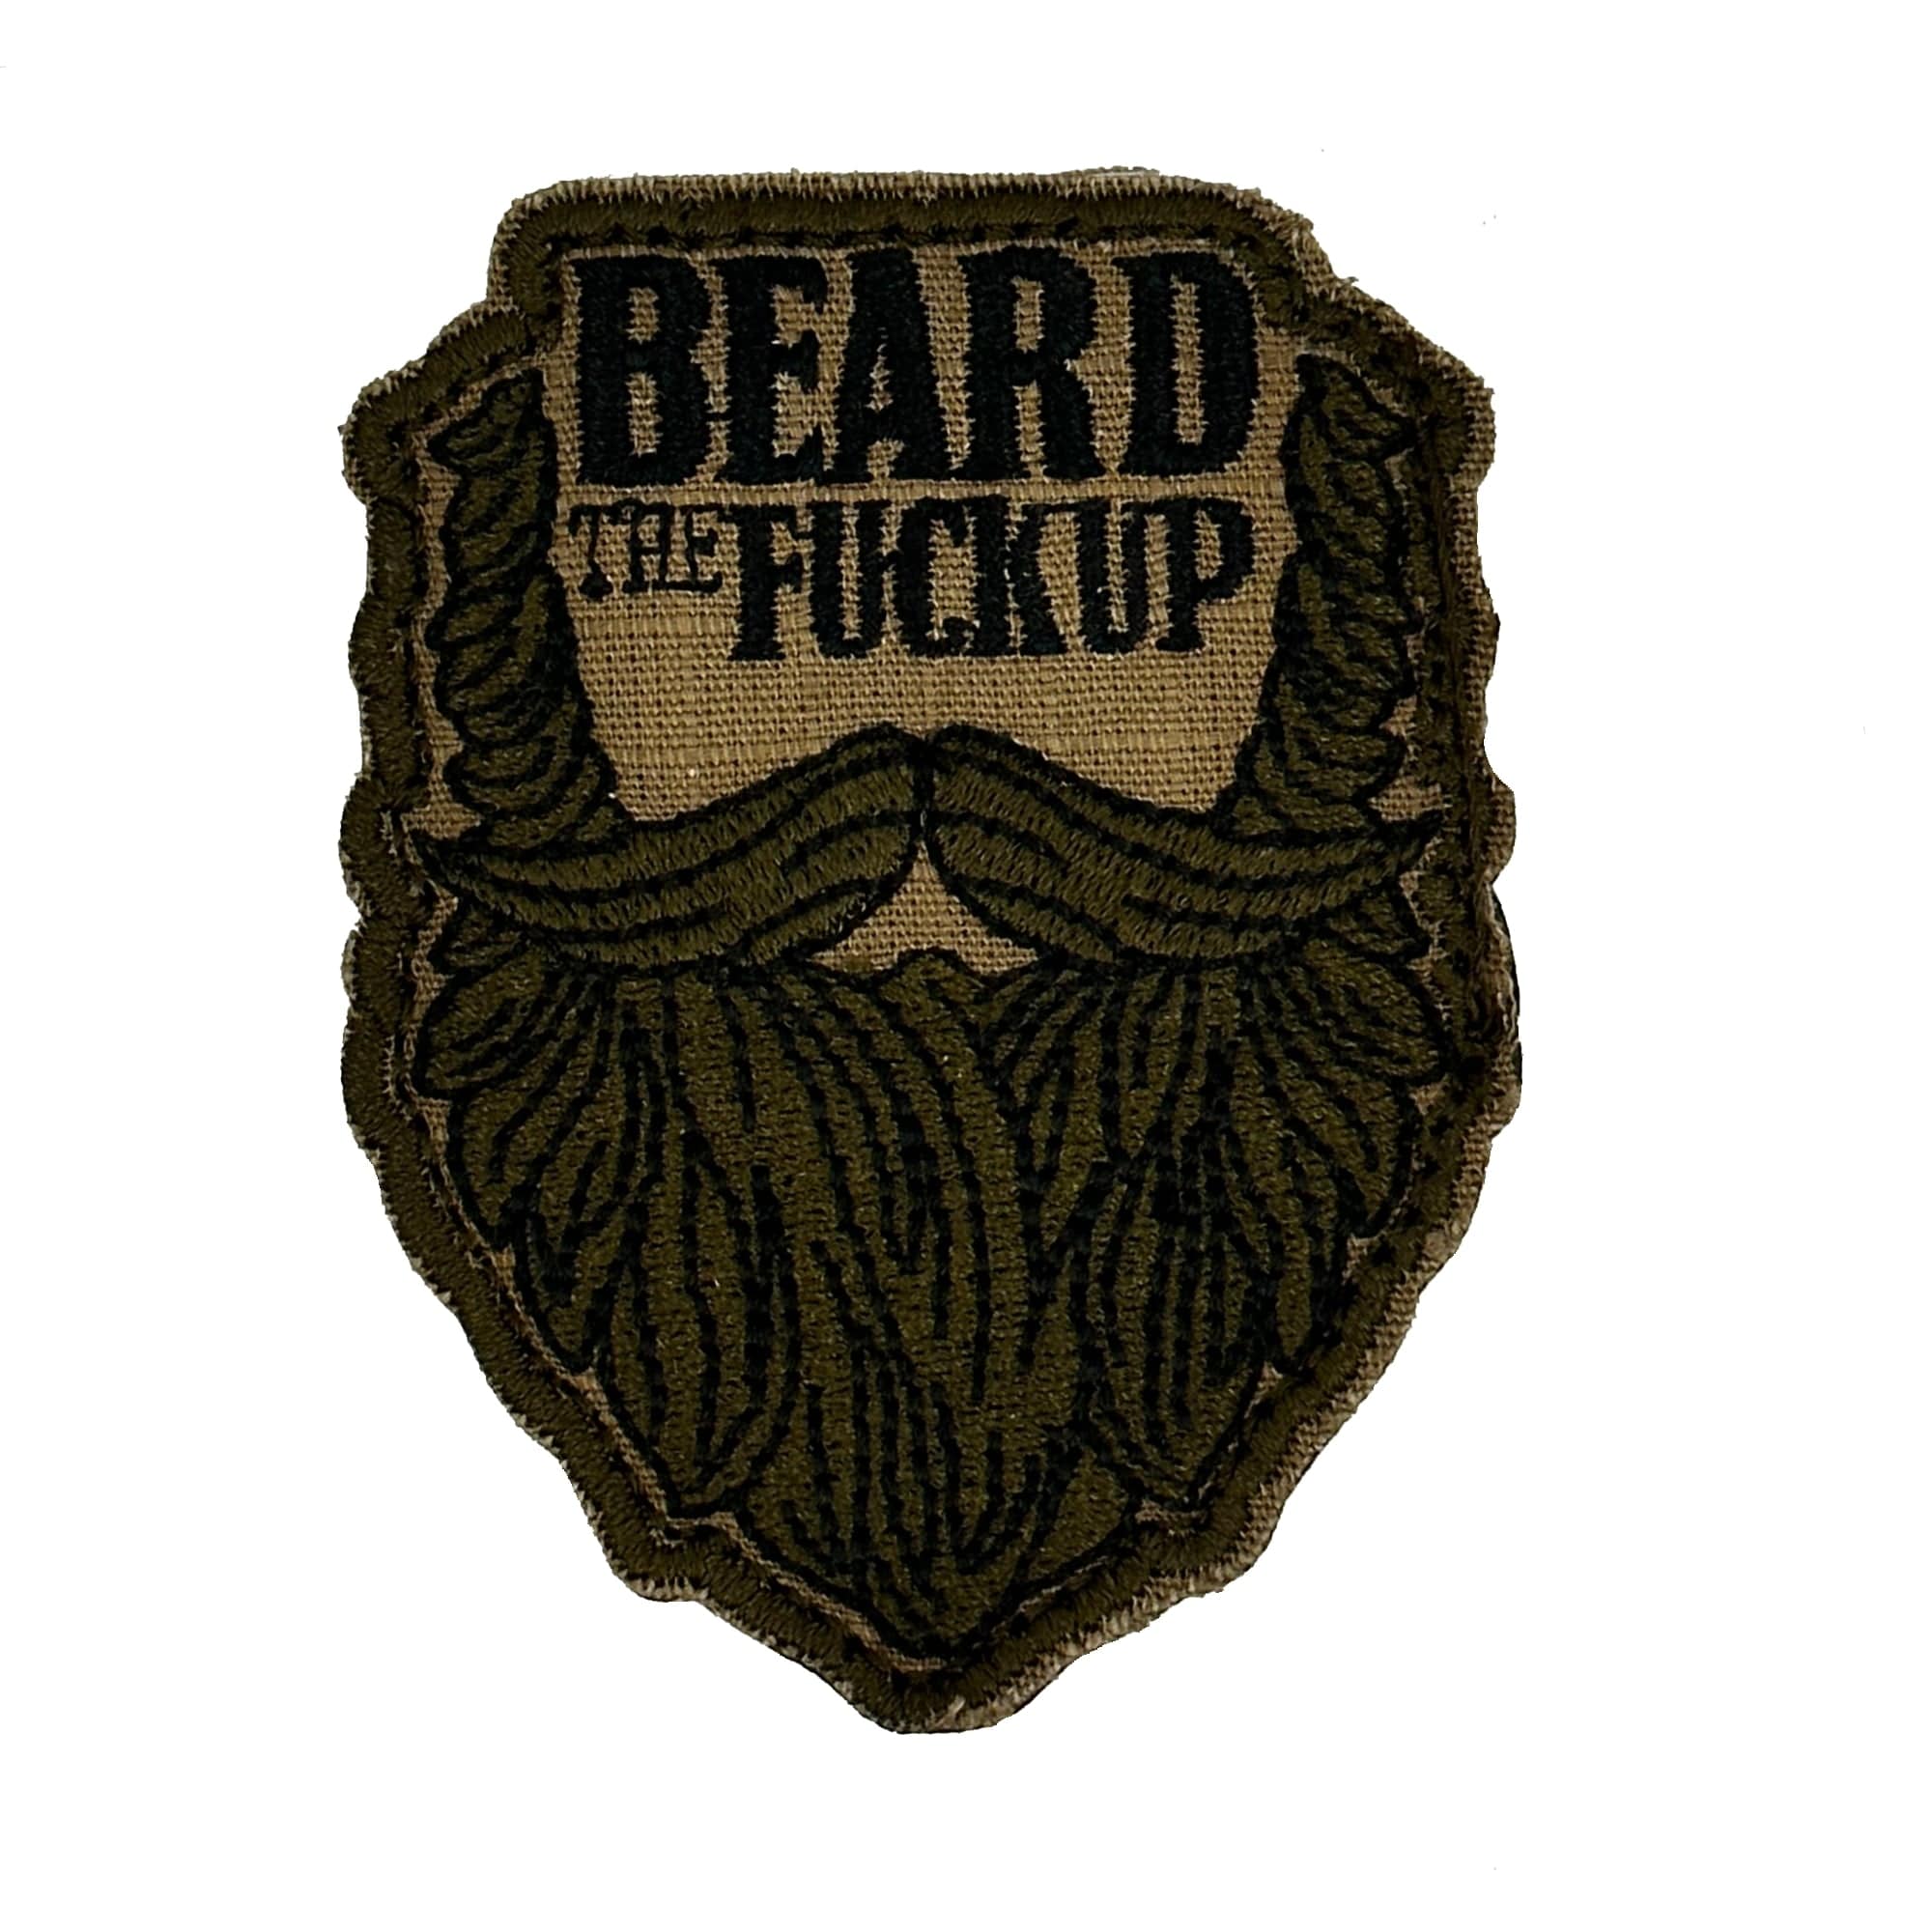 Tactical Gear Junkie Patches Coyote Brown Beard the Fuck Up - 3" Laser Cut Patch